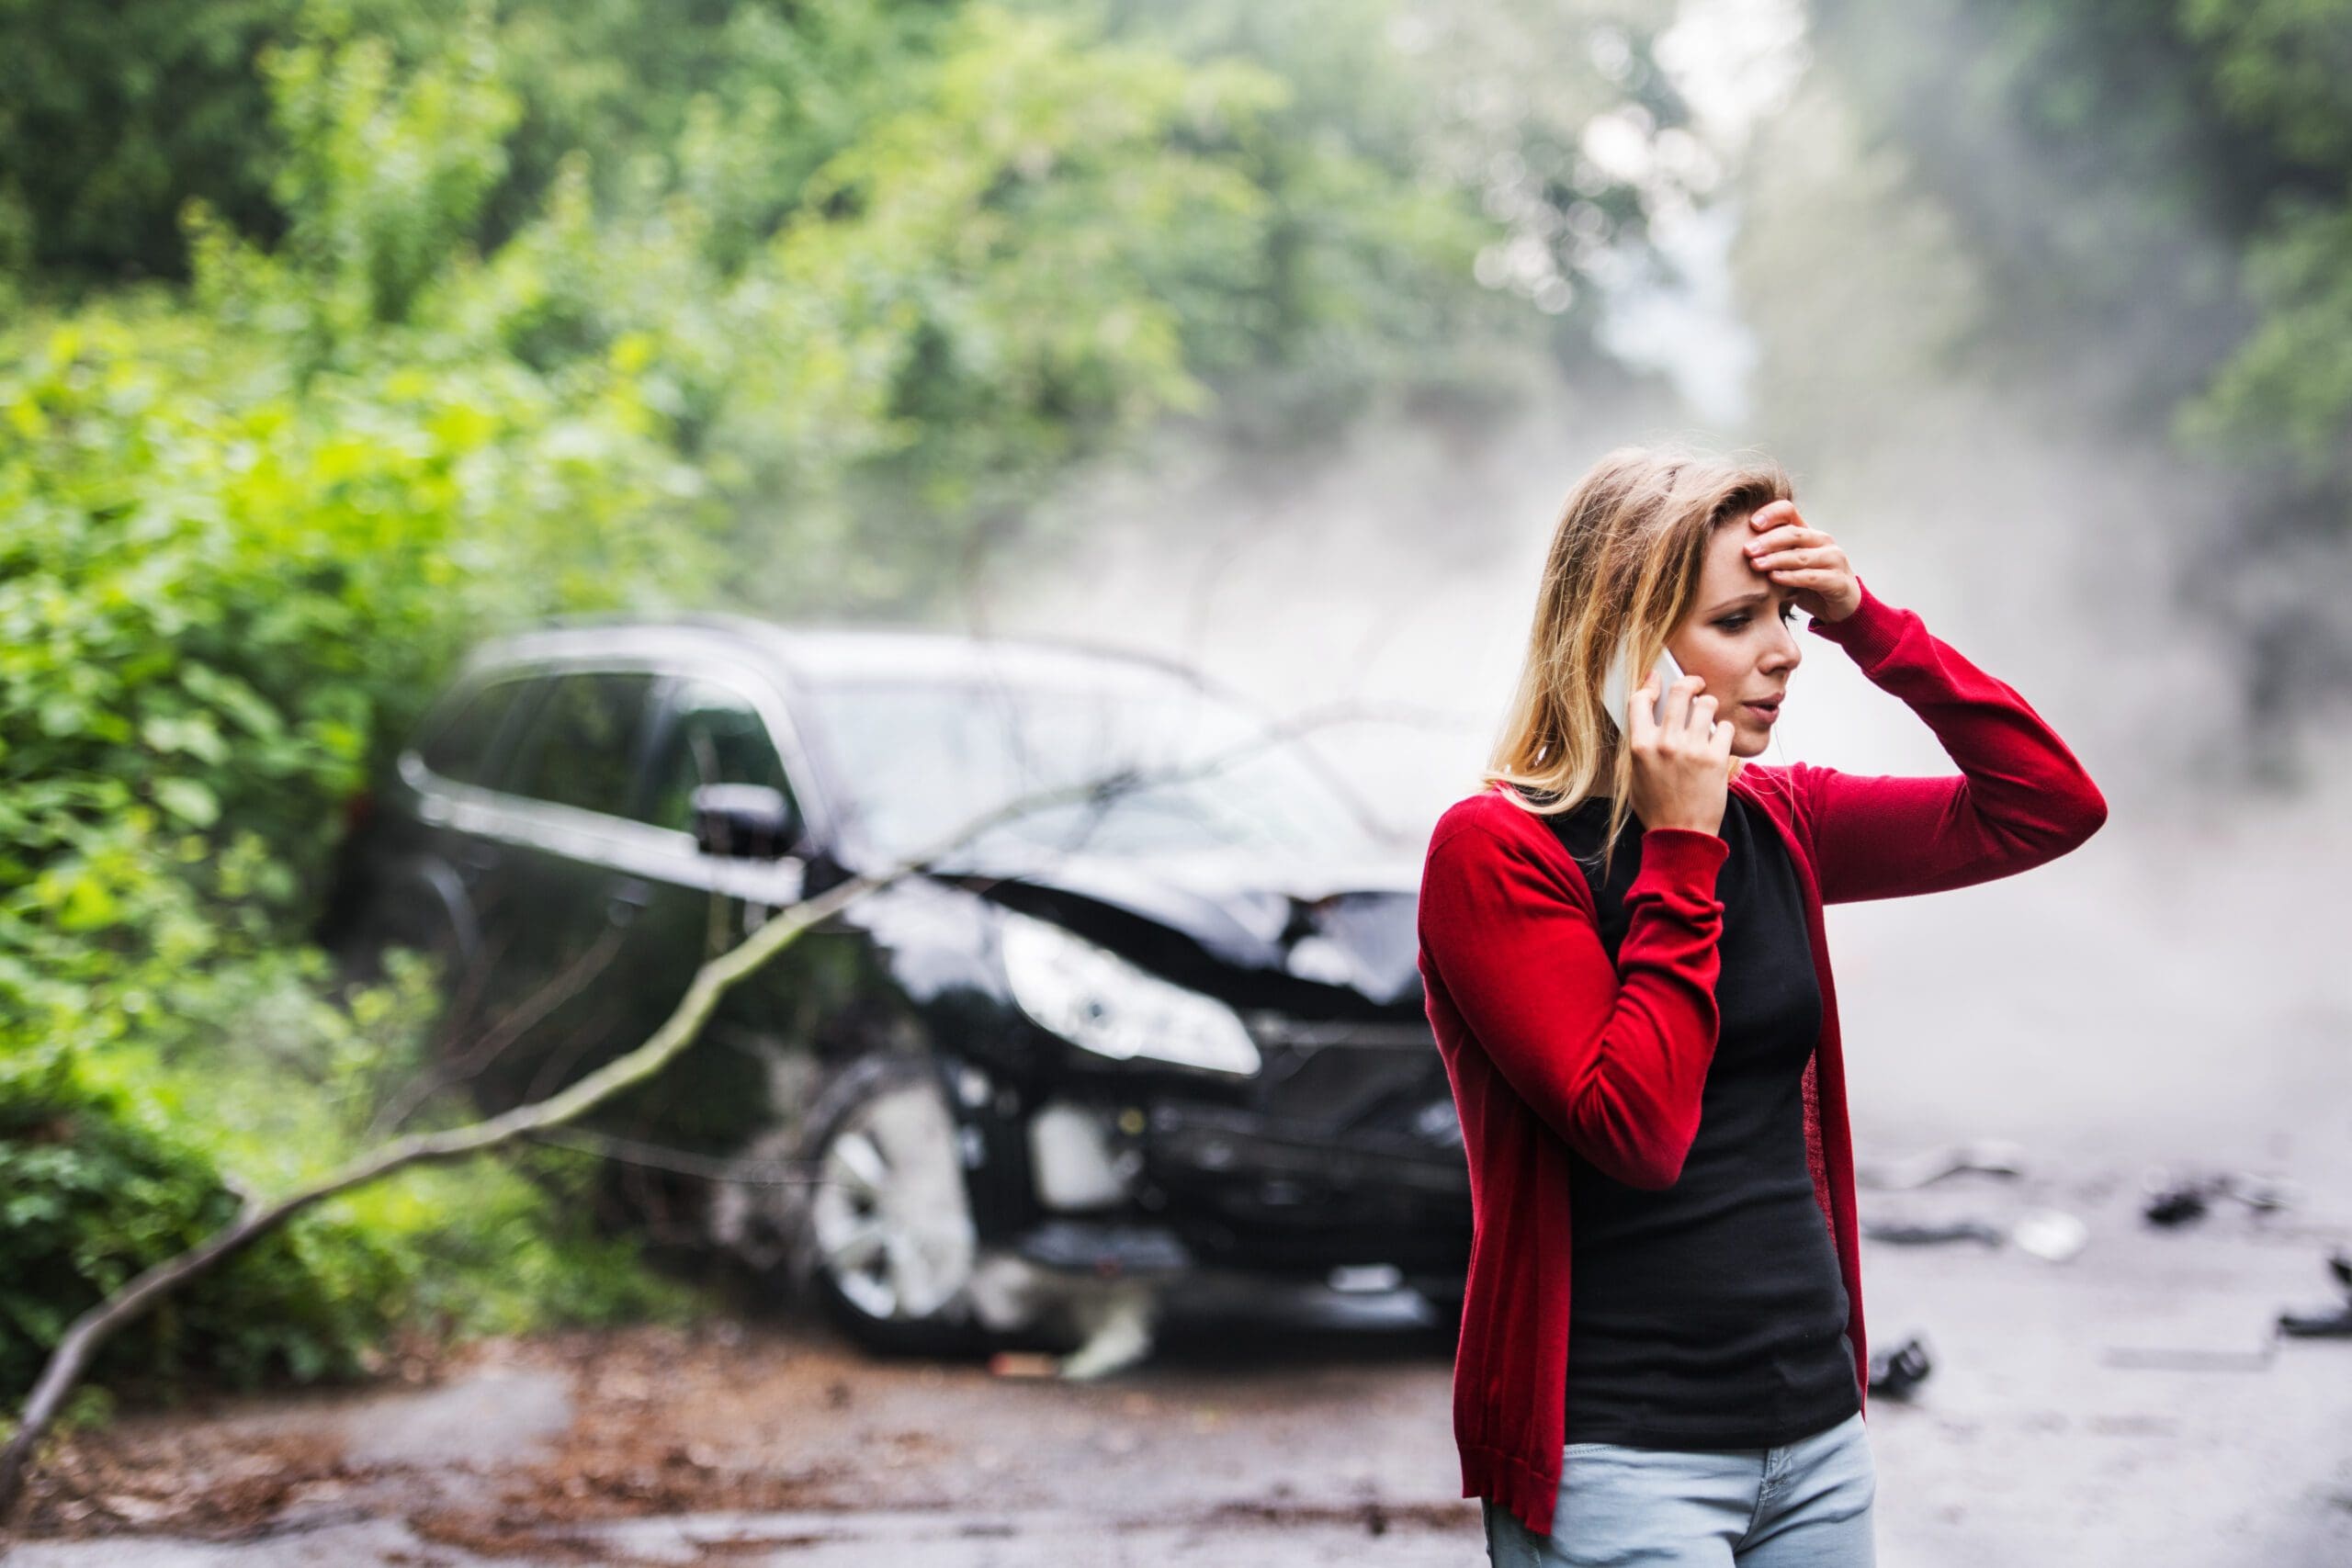 https://www.accidentinjurylawyers.claims/wp-content/uploads/2022/12/a-young-woman-with-smartphone-by-the-damaged-car-a-2021-08-26-12-09-13-utc-1-scaled.jpg